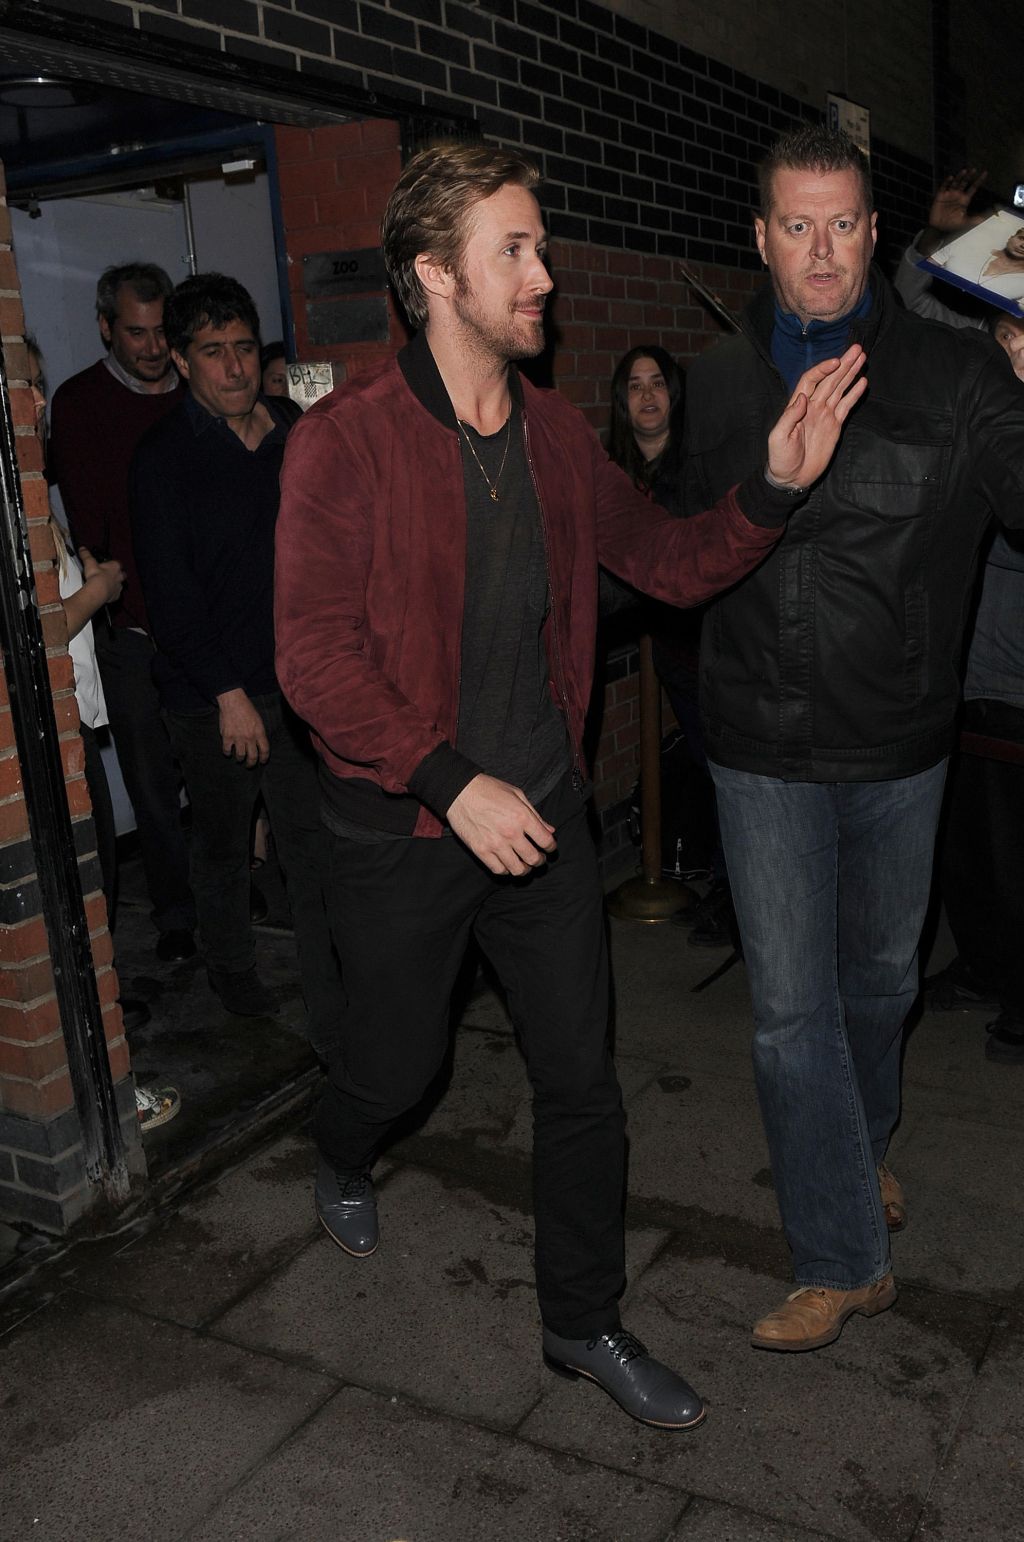 Ryan Gosling enjoys a night out with Matt Smith and Lily James at The Arts Club in Mayfair